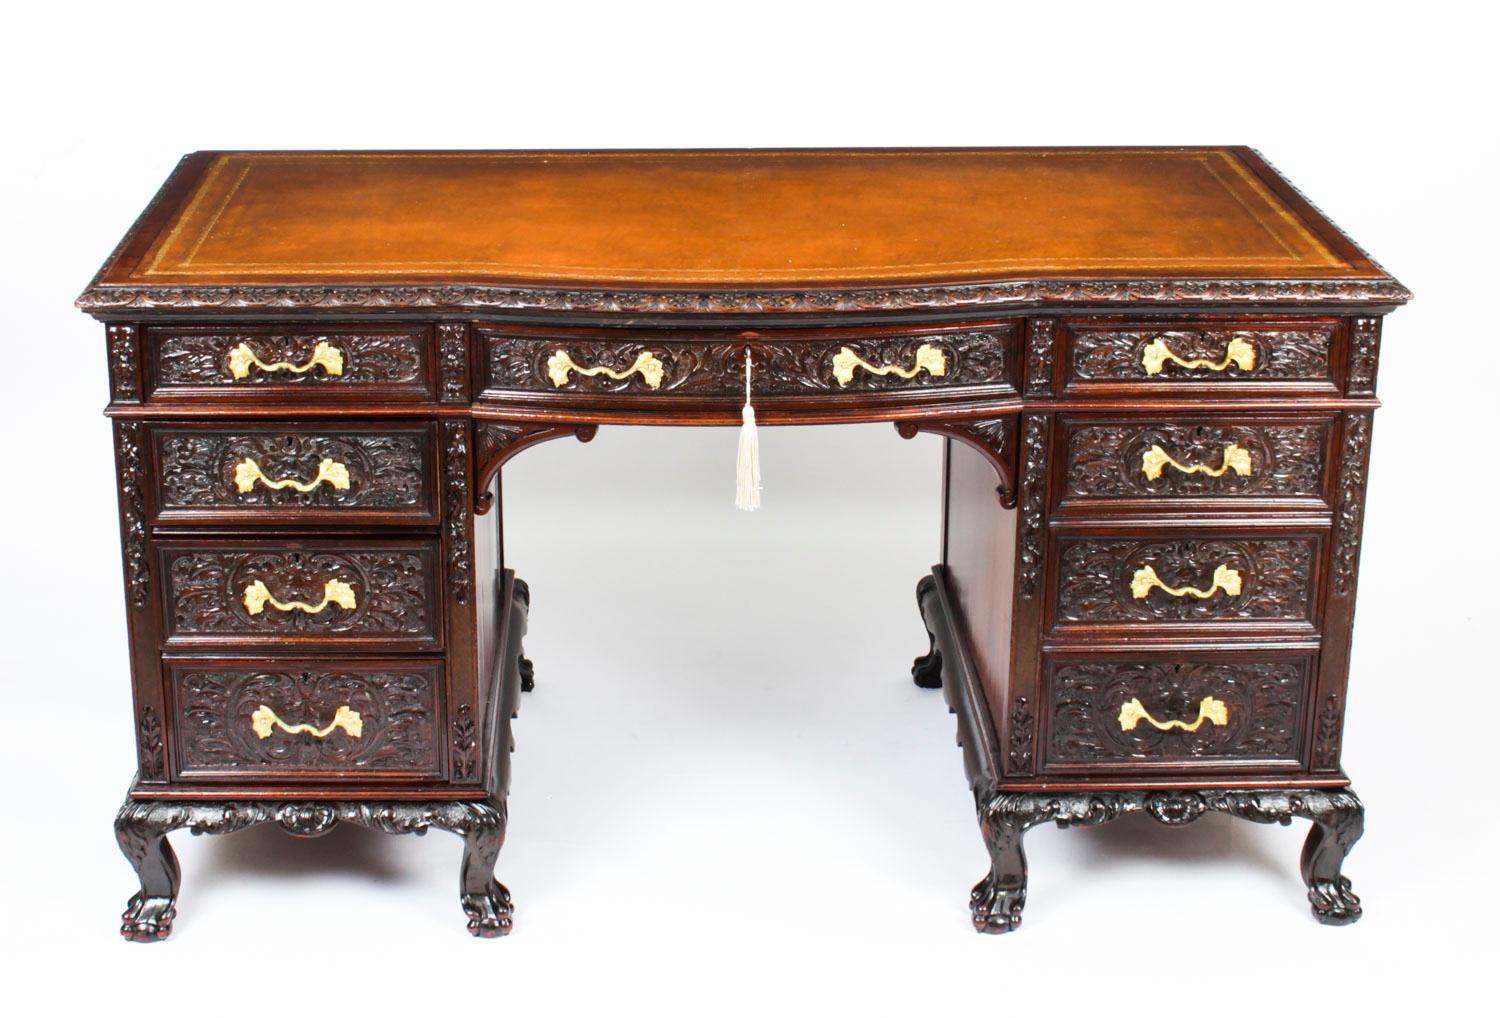 This is a beautiful antique Edwardian Period mahogany kneehole desk, circa 1900 in date.

The desk features a beautifully moulded top with an inset gold tooled tan leather writing surface and foliate carved border, and is serpentine in shape with